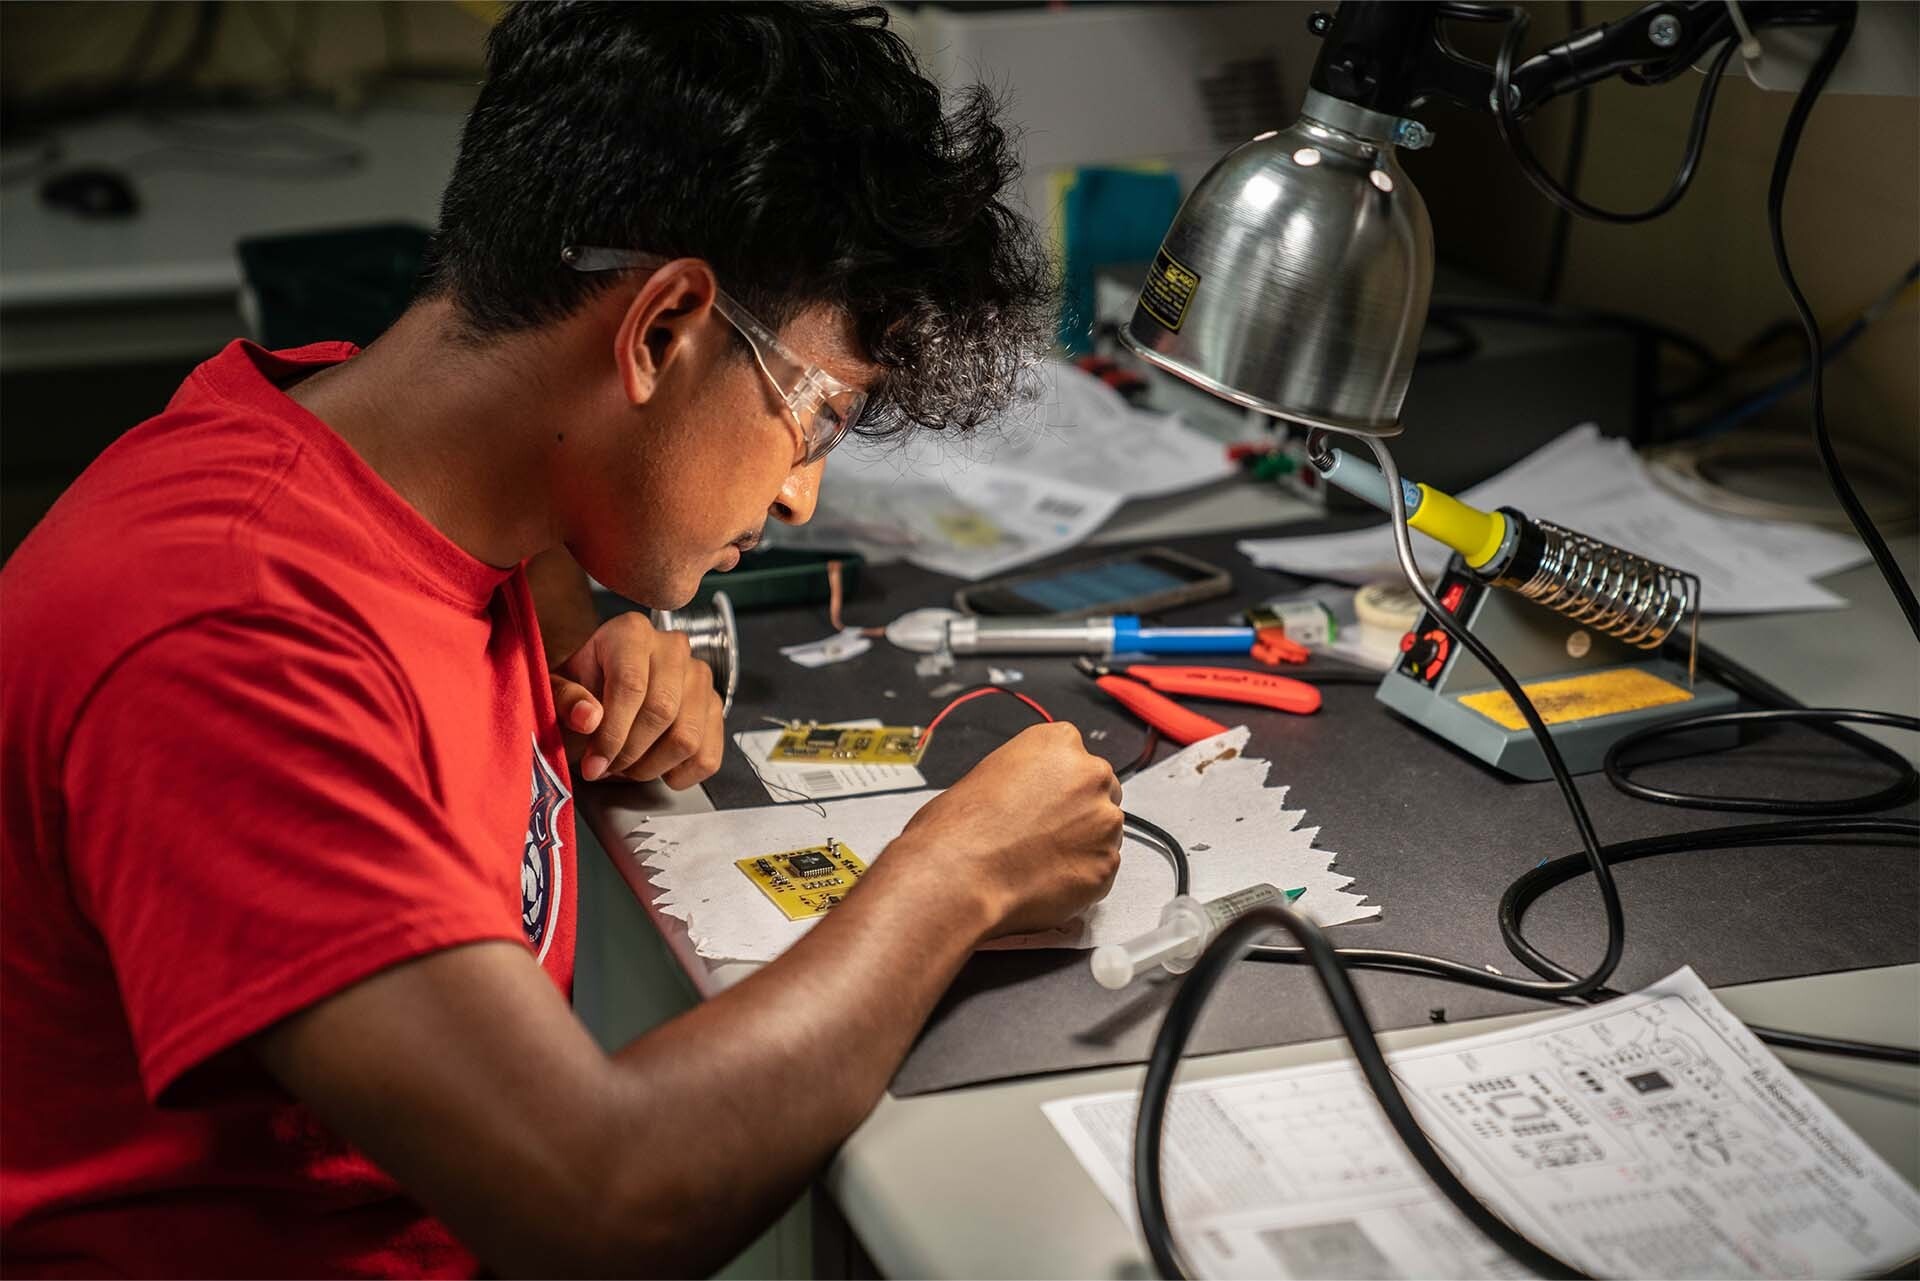 Students working in the Circuits Lab